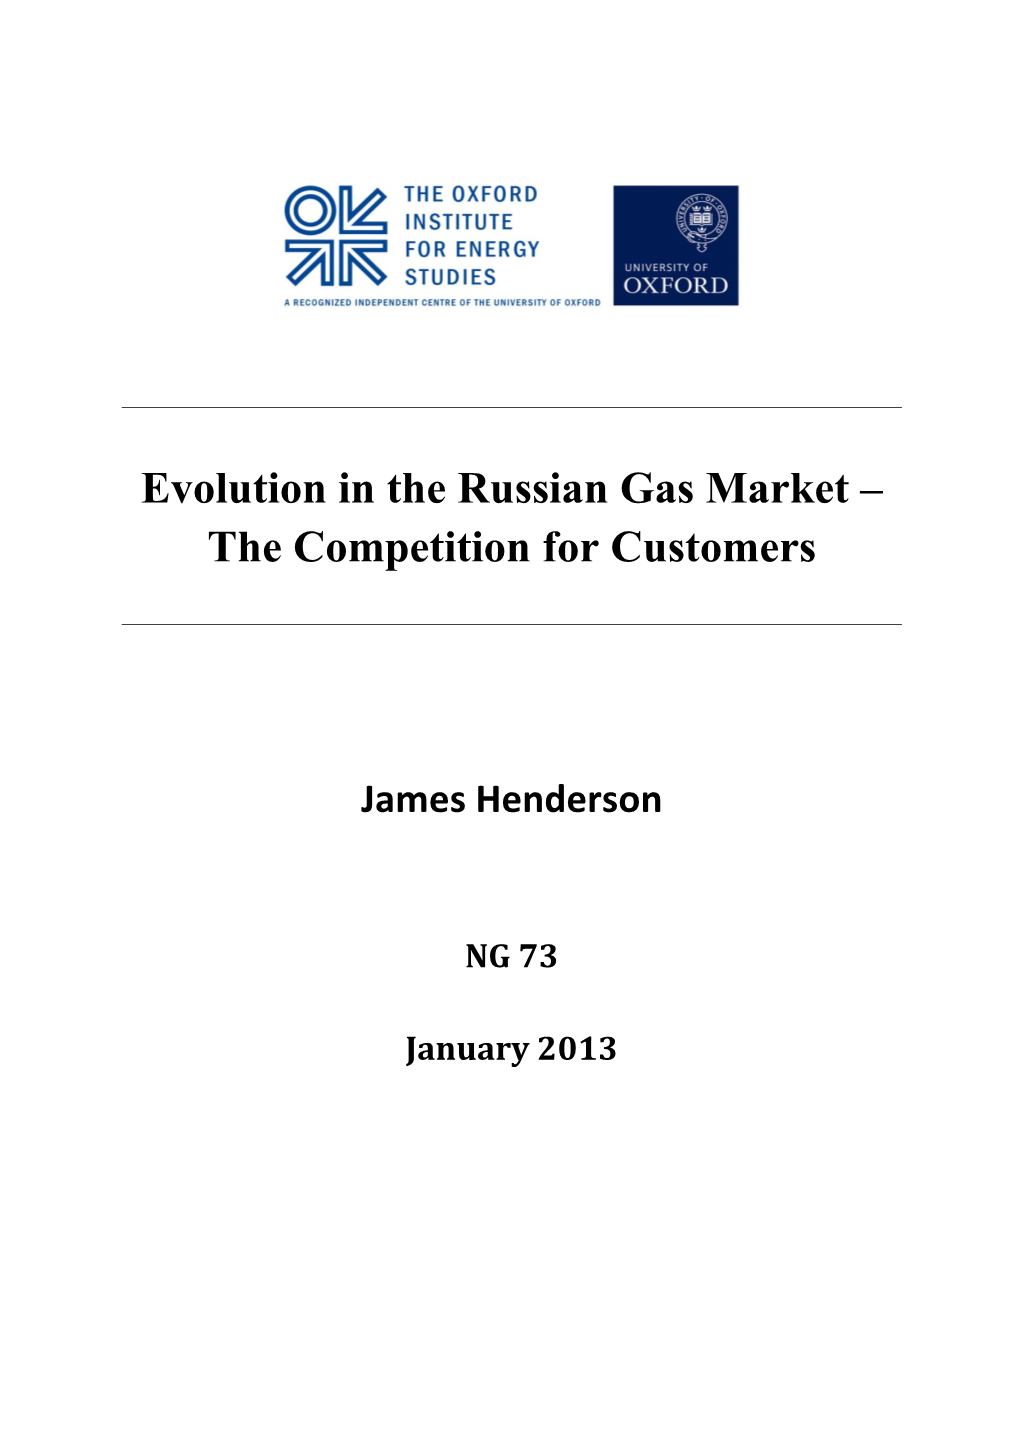 Evolution in the Russian Gas Market – the Competition for Customers